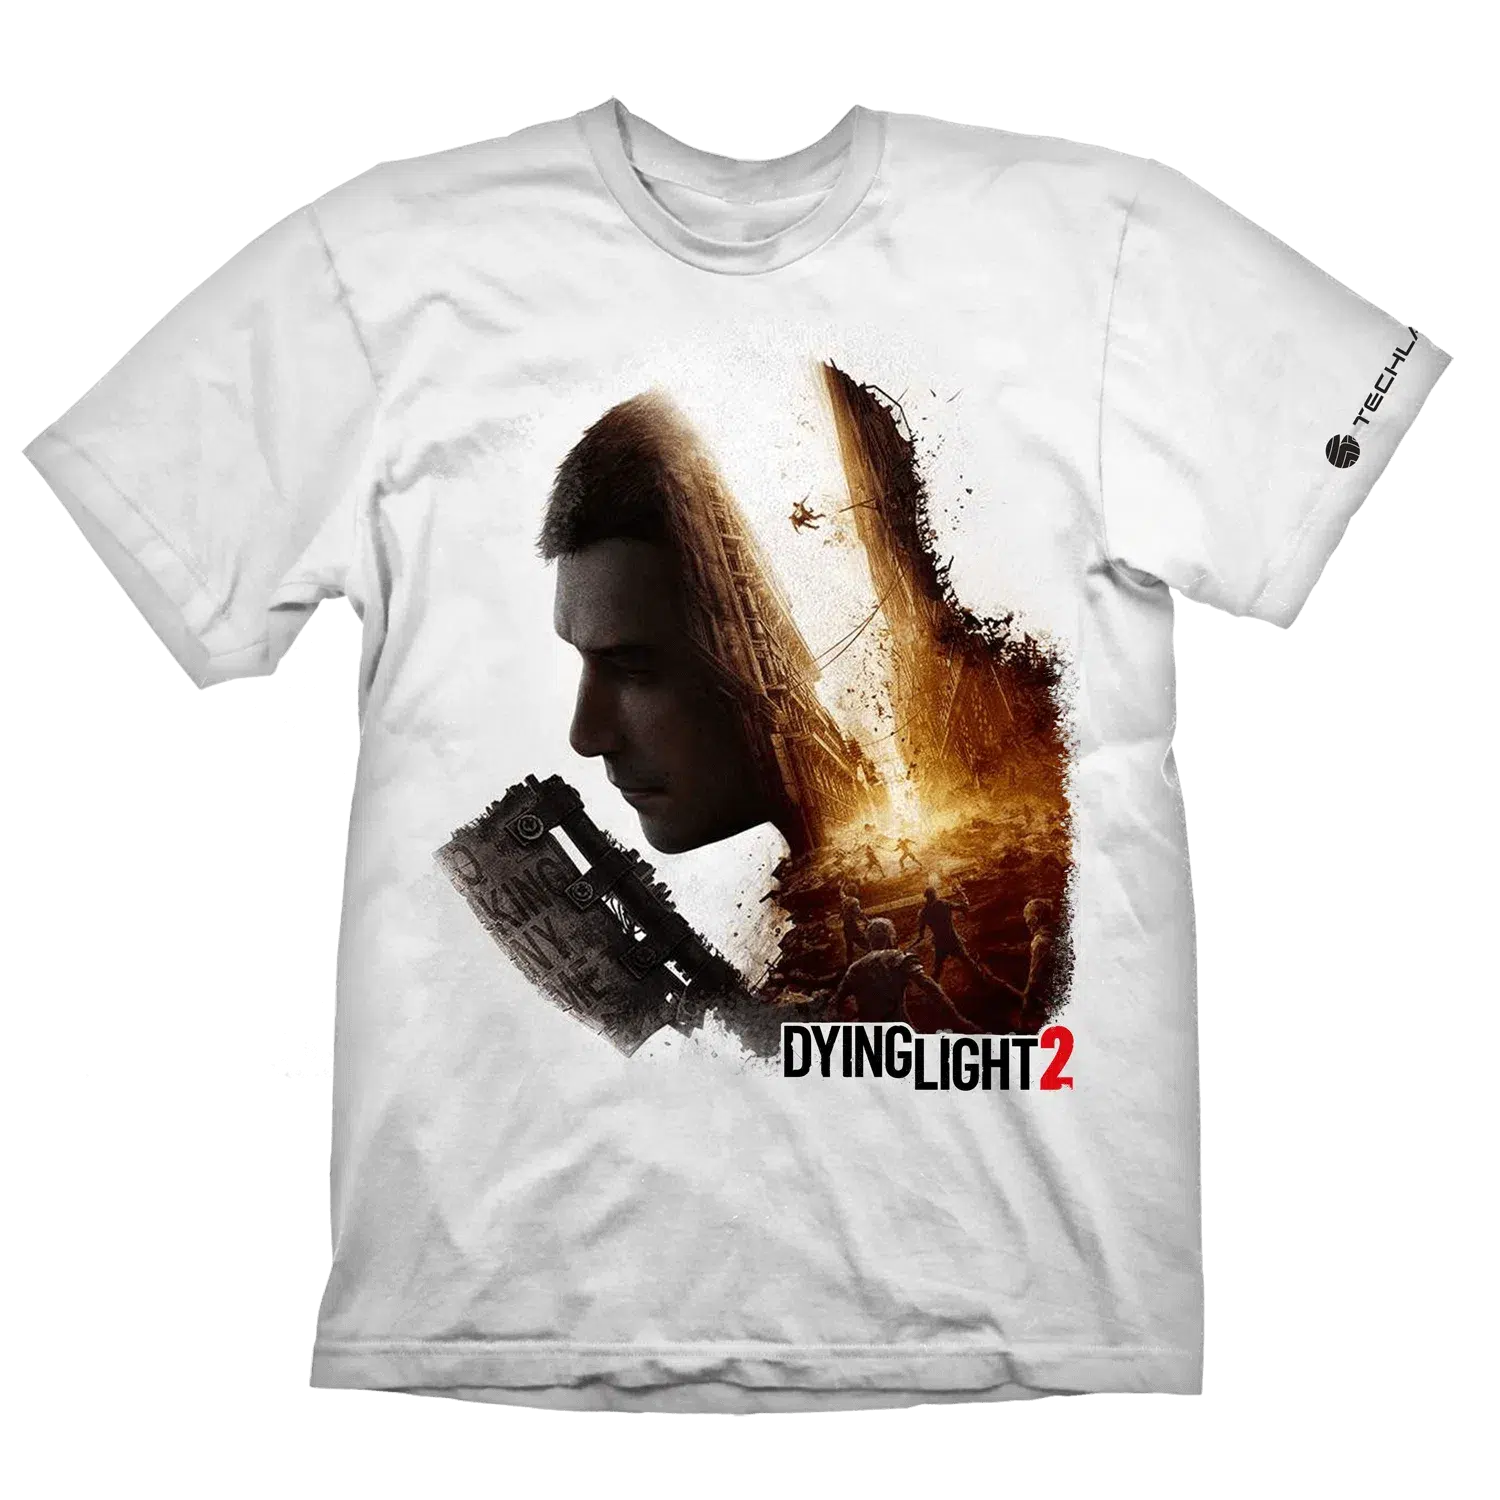 Dying Light 2 T-Shirt "Aiden Caldwell" White L